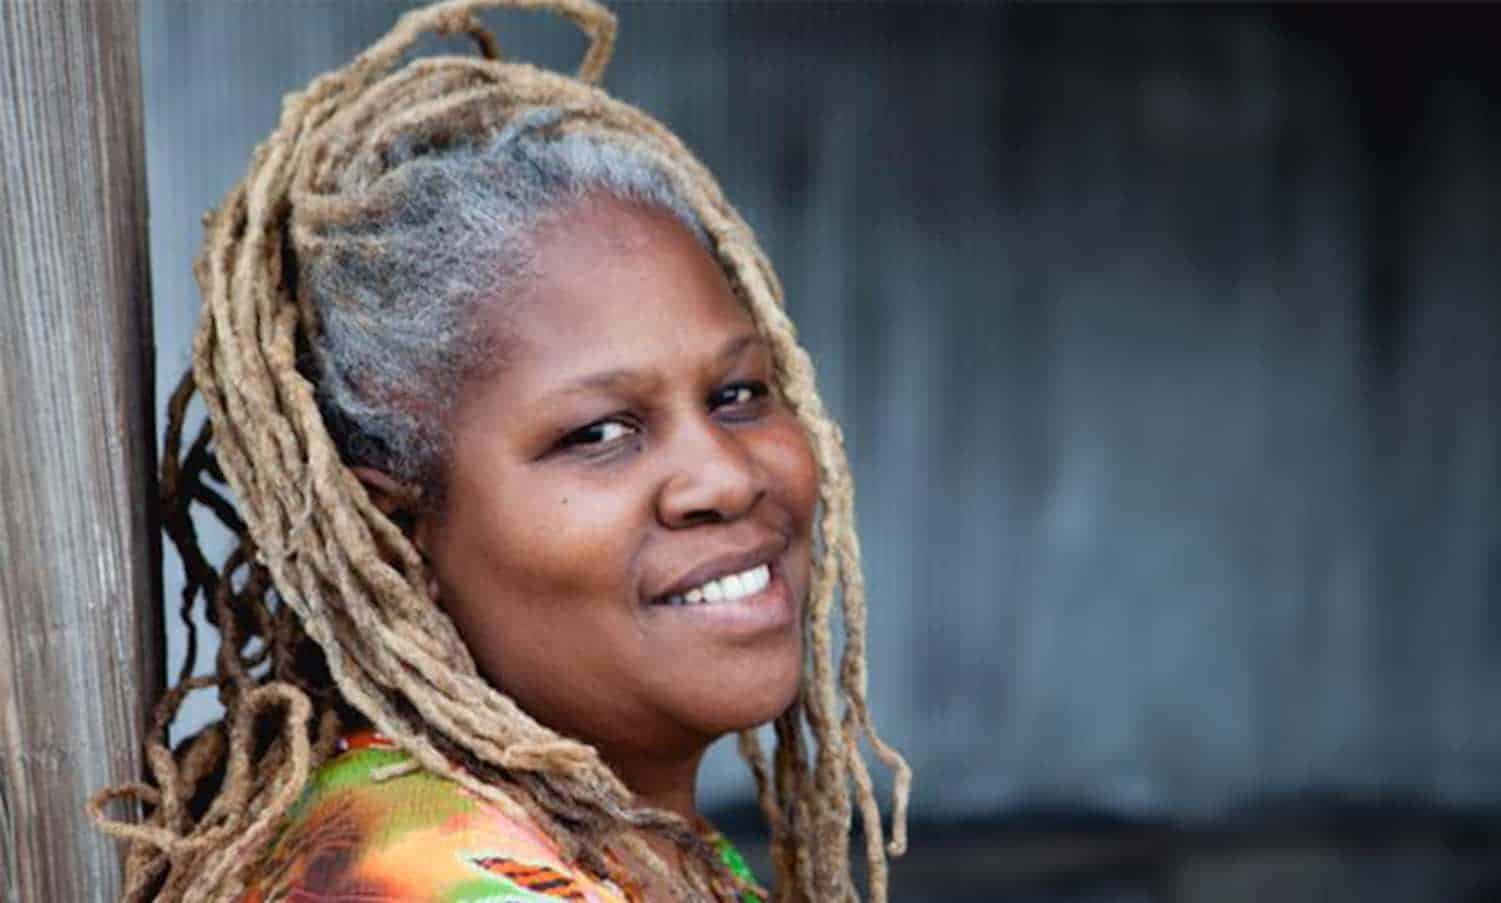 On Rise and Root Farm, farmers are rooted in social justice; Karen Washington is leading farmers supporting marginalized communities.